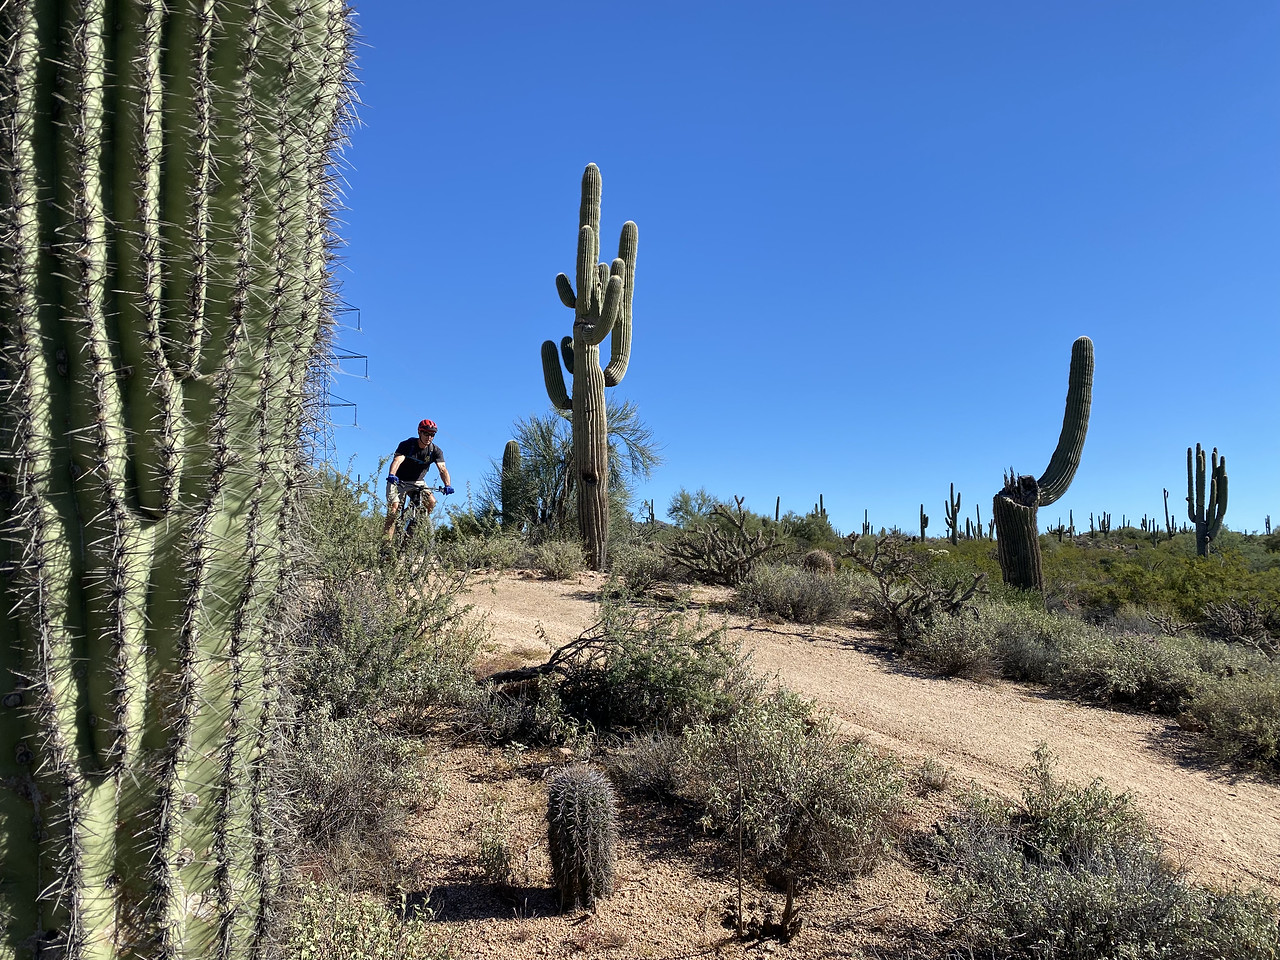 A guests descends a Cactus-dotted scenic trail during one of the Phoenix mountain bike tours with the Wild Bunch Desert Guides.